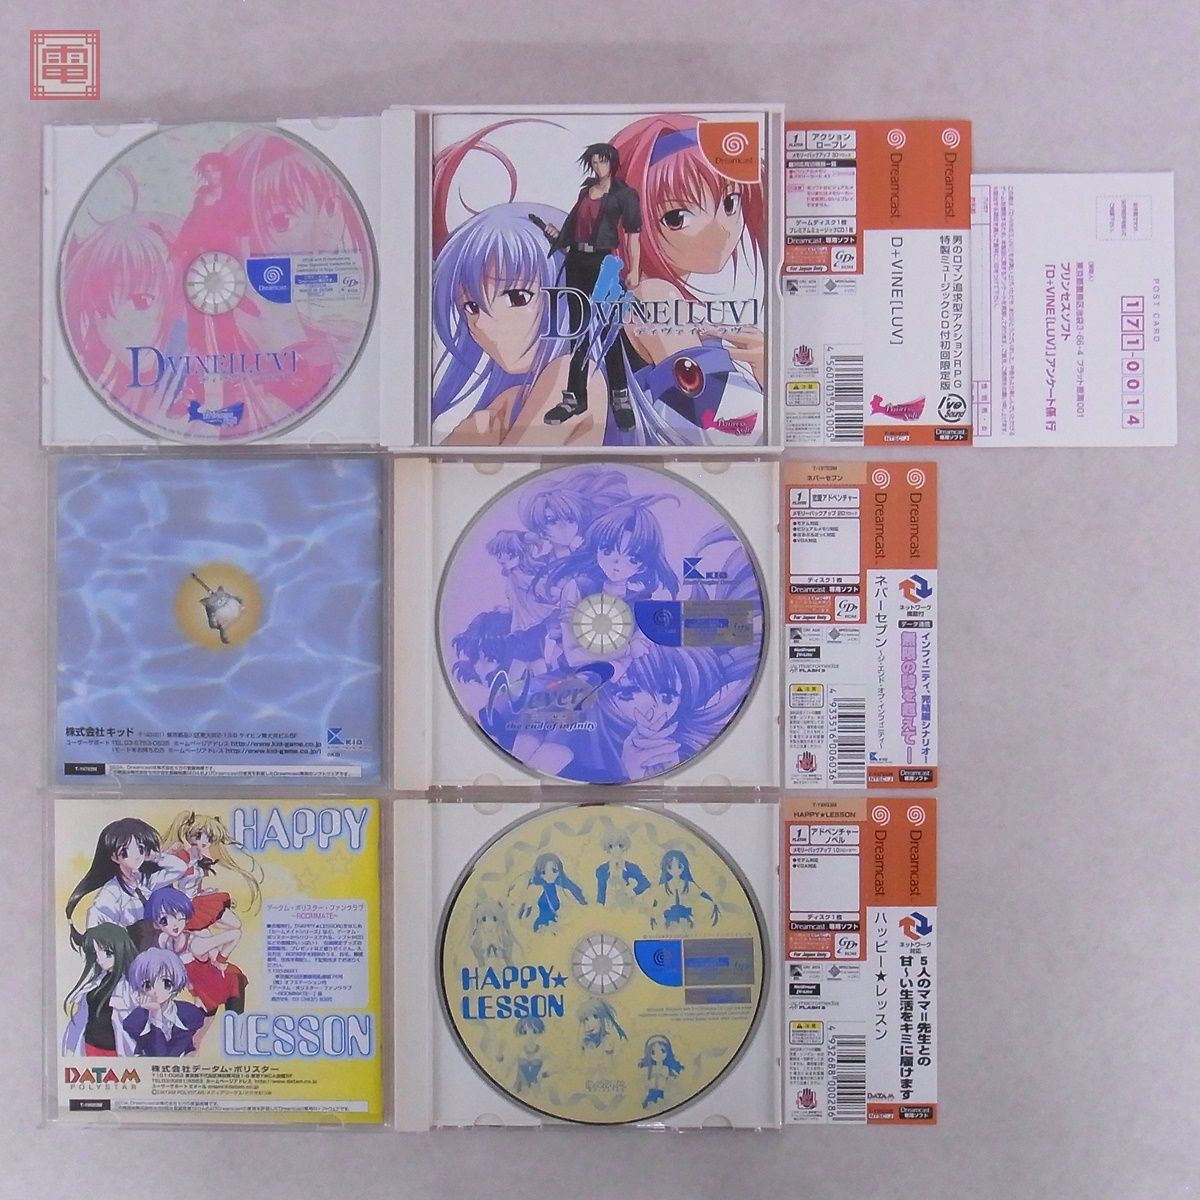  operation guarantee goods DC Dreamcast fire .../.. gentleman DASH!/ memory z off Complete etc. beautiful young lady series together 10 pcs set box opinion attaching [10